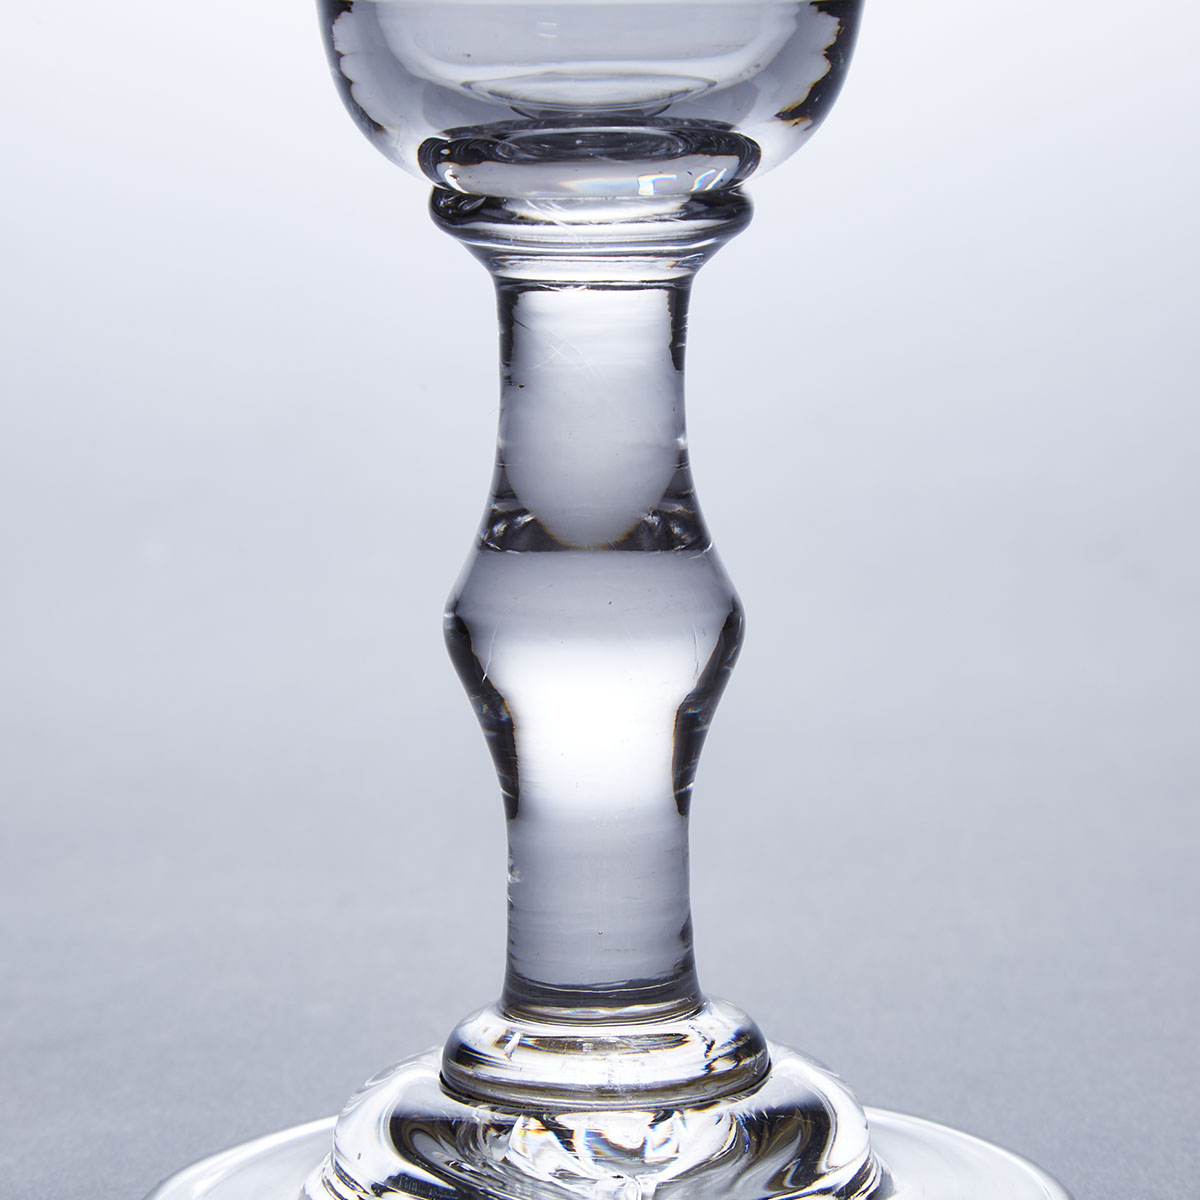 English Engraved Balustroid Knopped Stemmed Glass Sweetmeat Goblet, c.1760-90